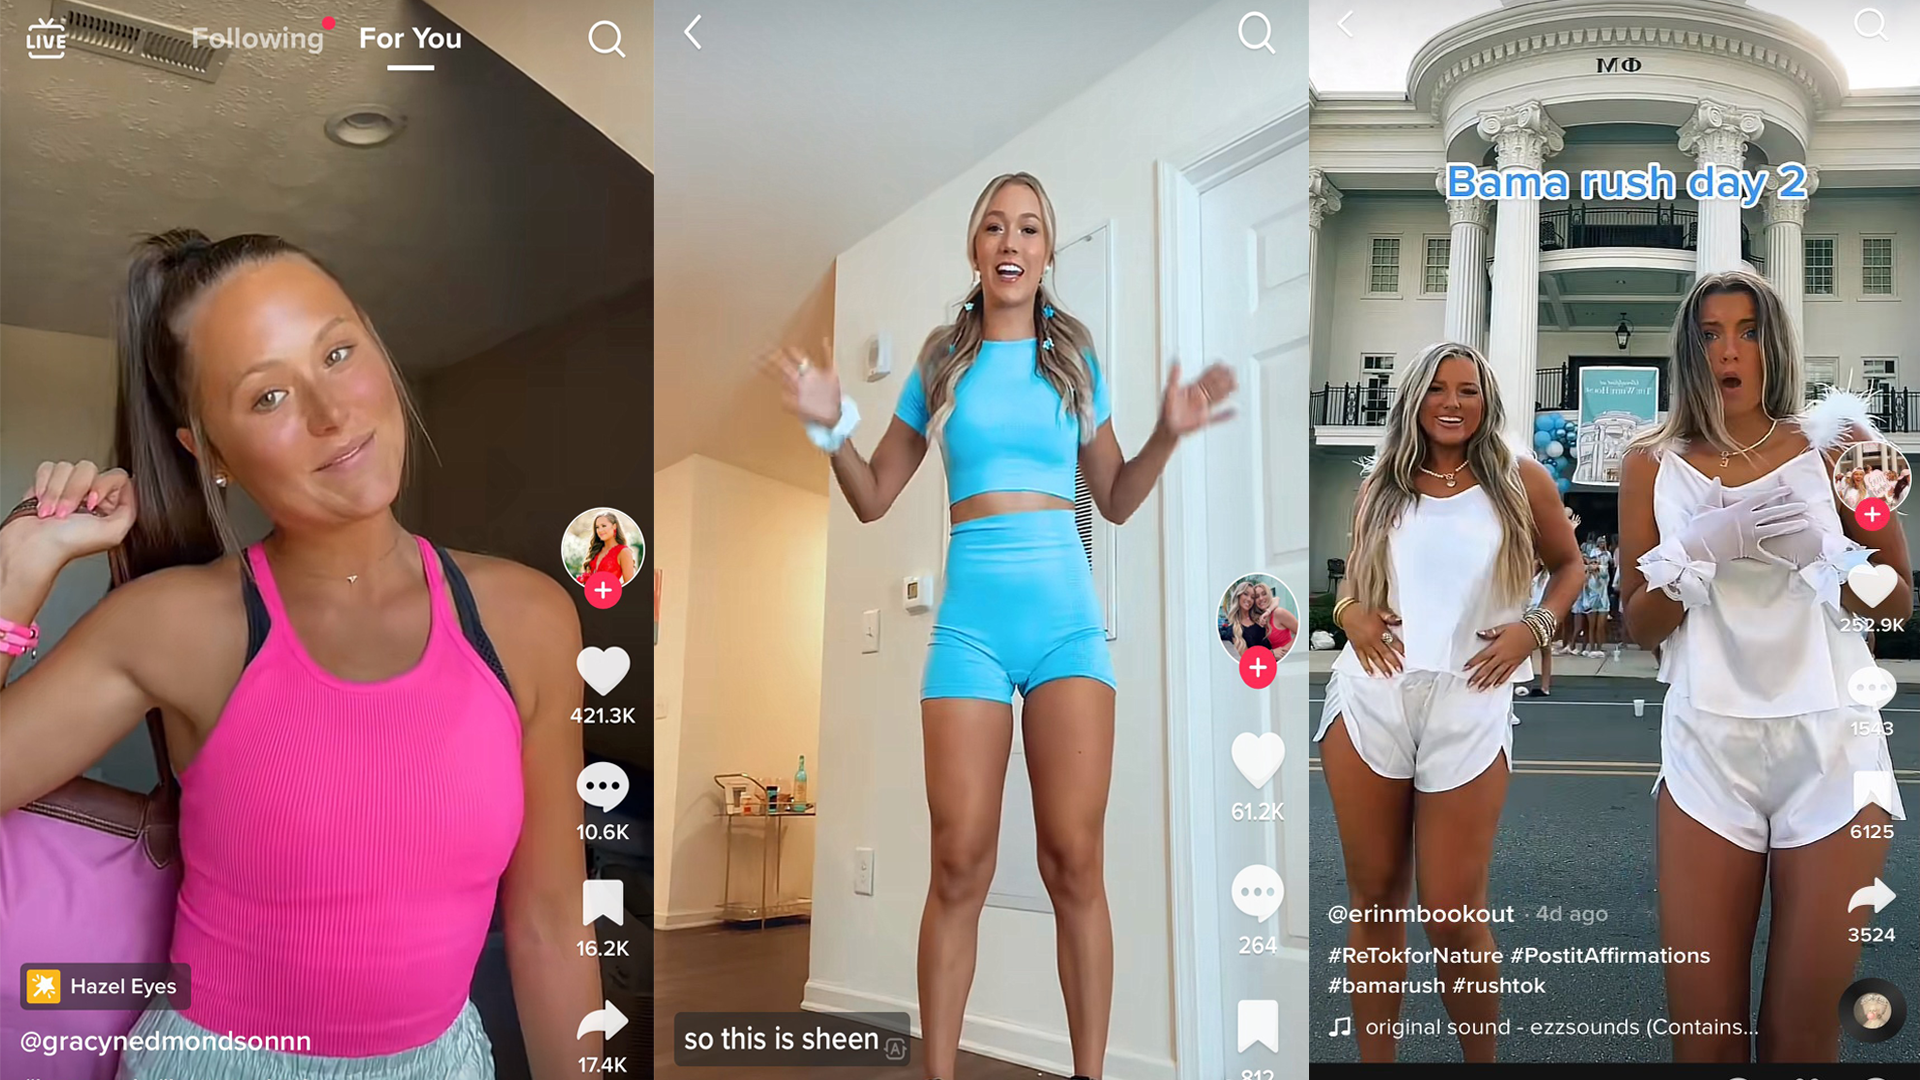 Composite of three TikTok screenshots showing blonde women showing off their outfits and bags as well as in front of a sorority house.